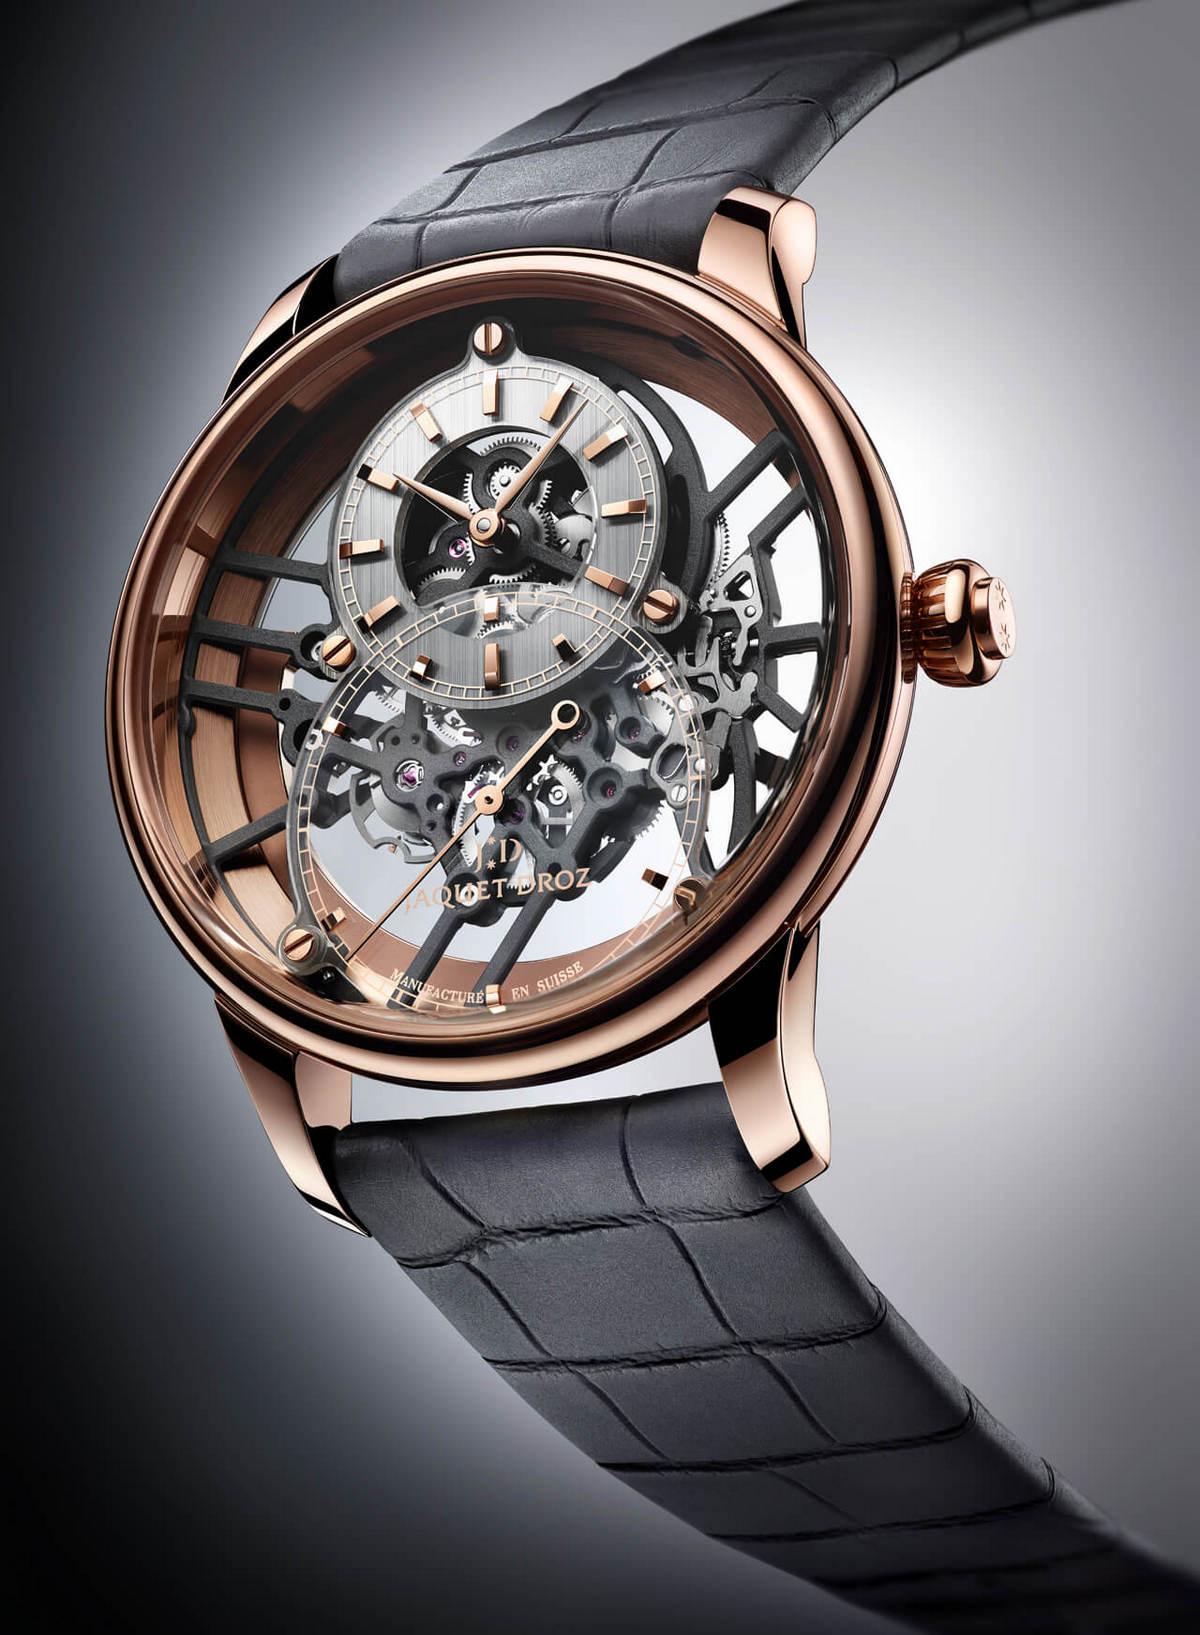 Jaquet Droz Grande Seconde Skelet-One is a gorgeous skeleton timepiece that comes in Plasma Ceramic and Red Gold